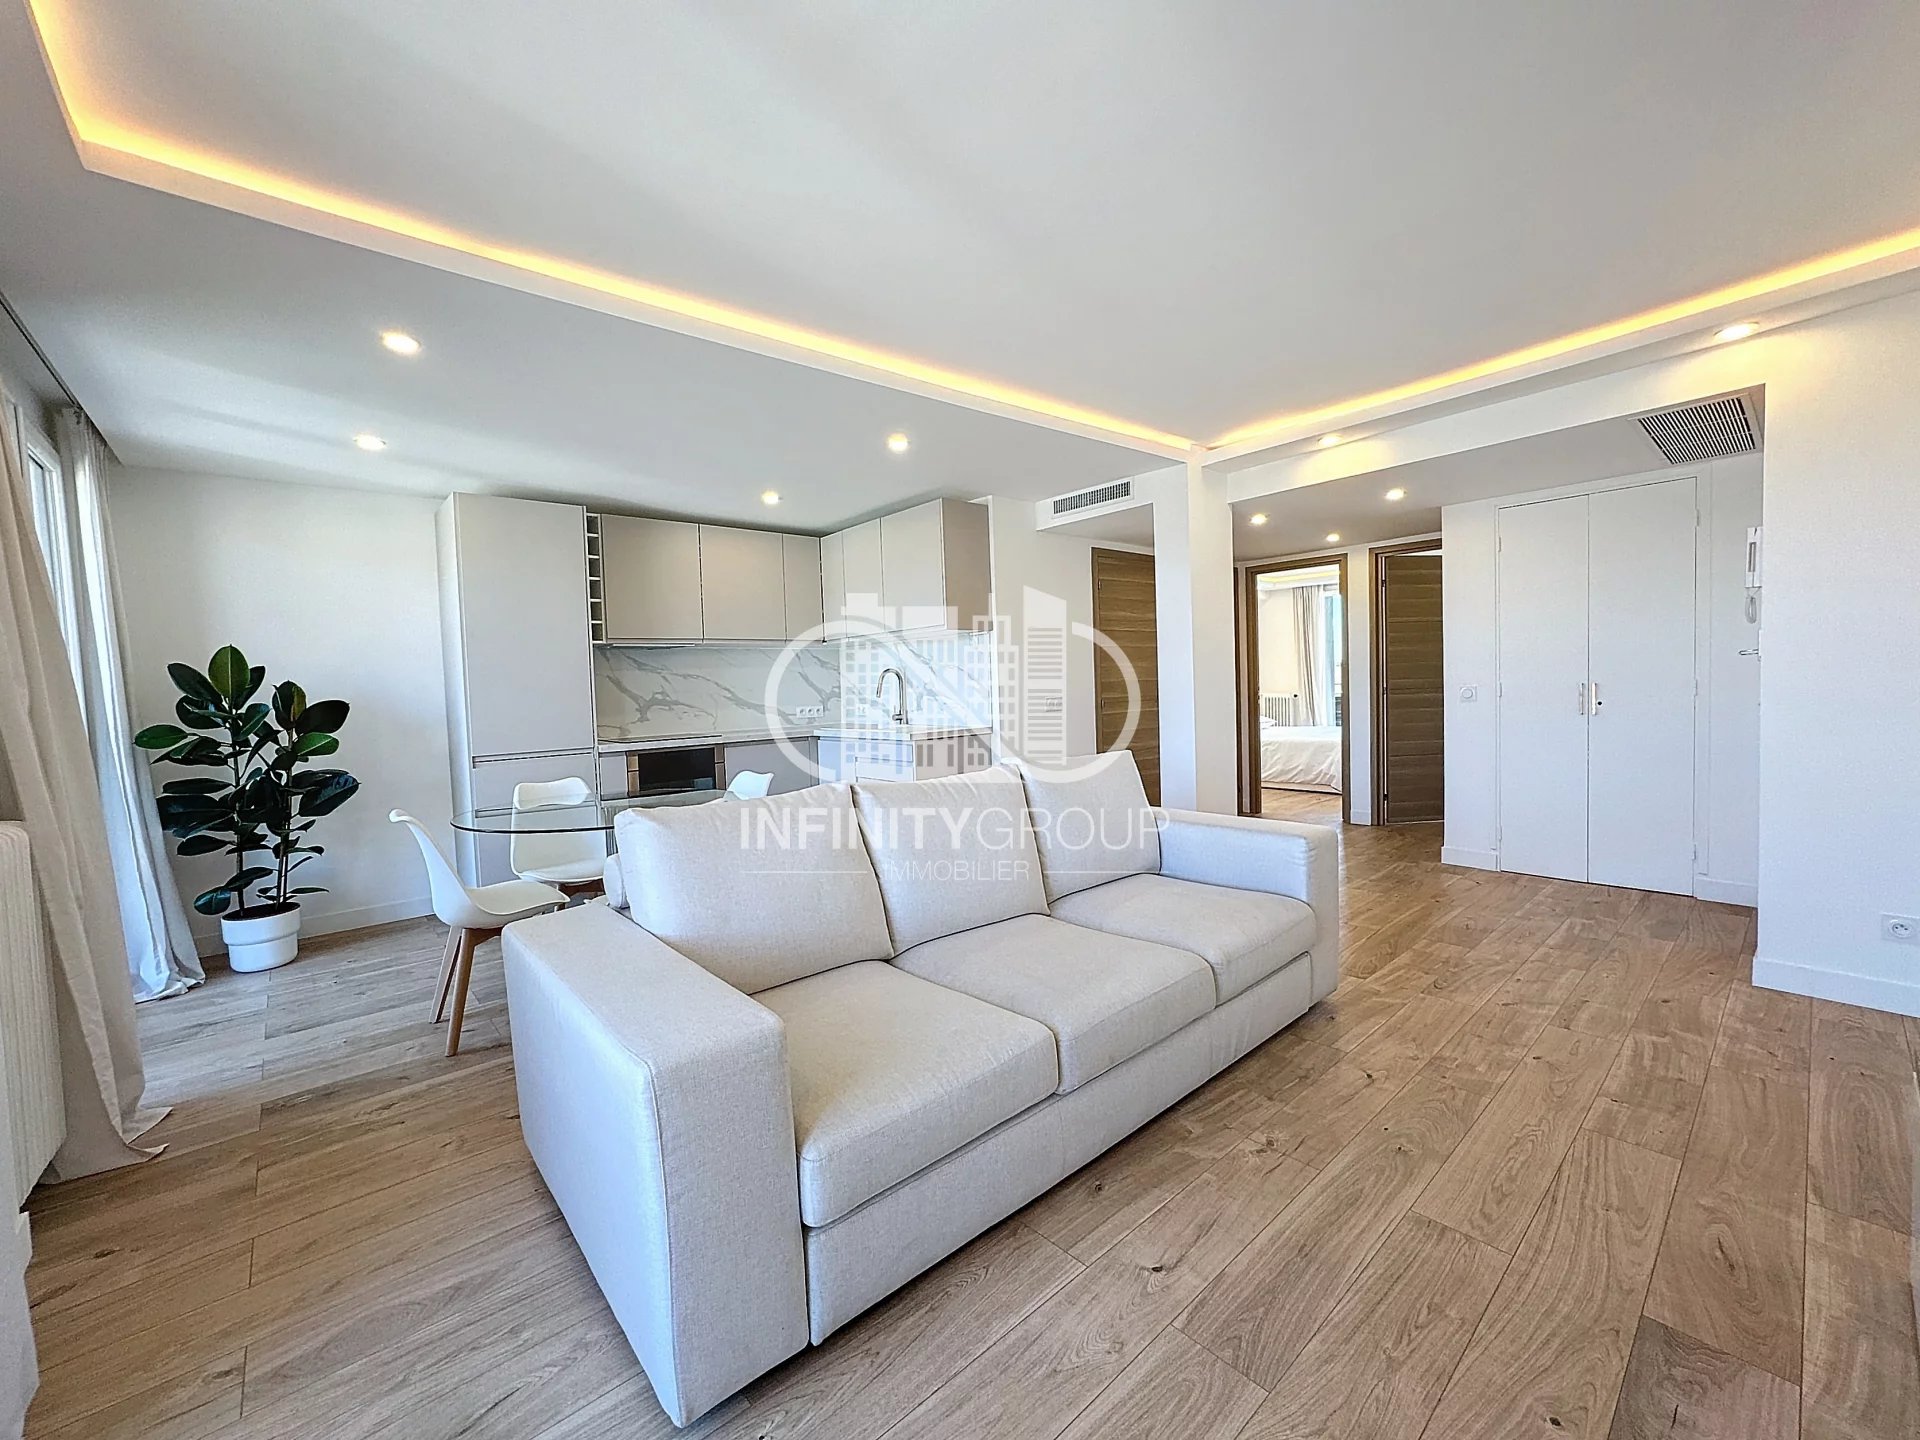 Vente Appartement 58m² 3 Pièces à Antibes (06600) - Infinity Group Immobilier